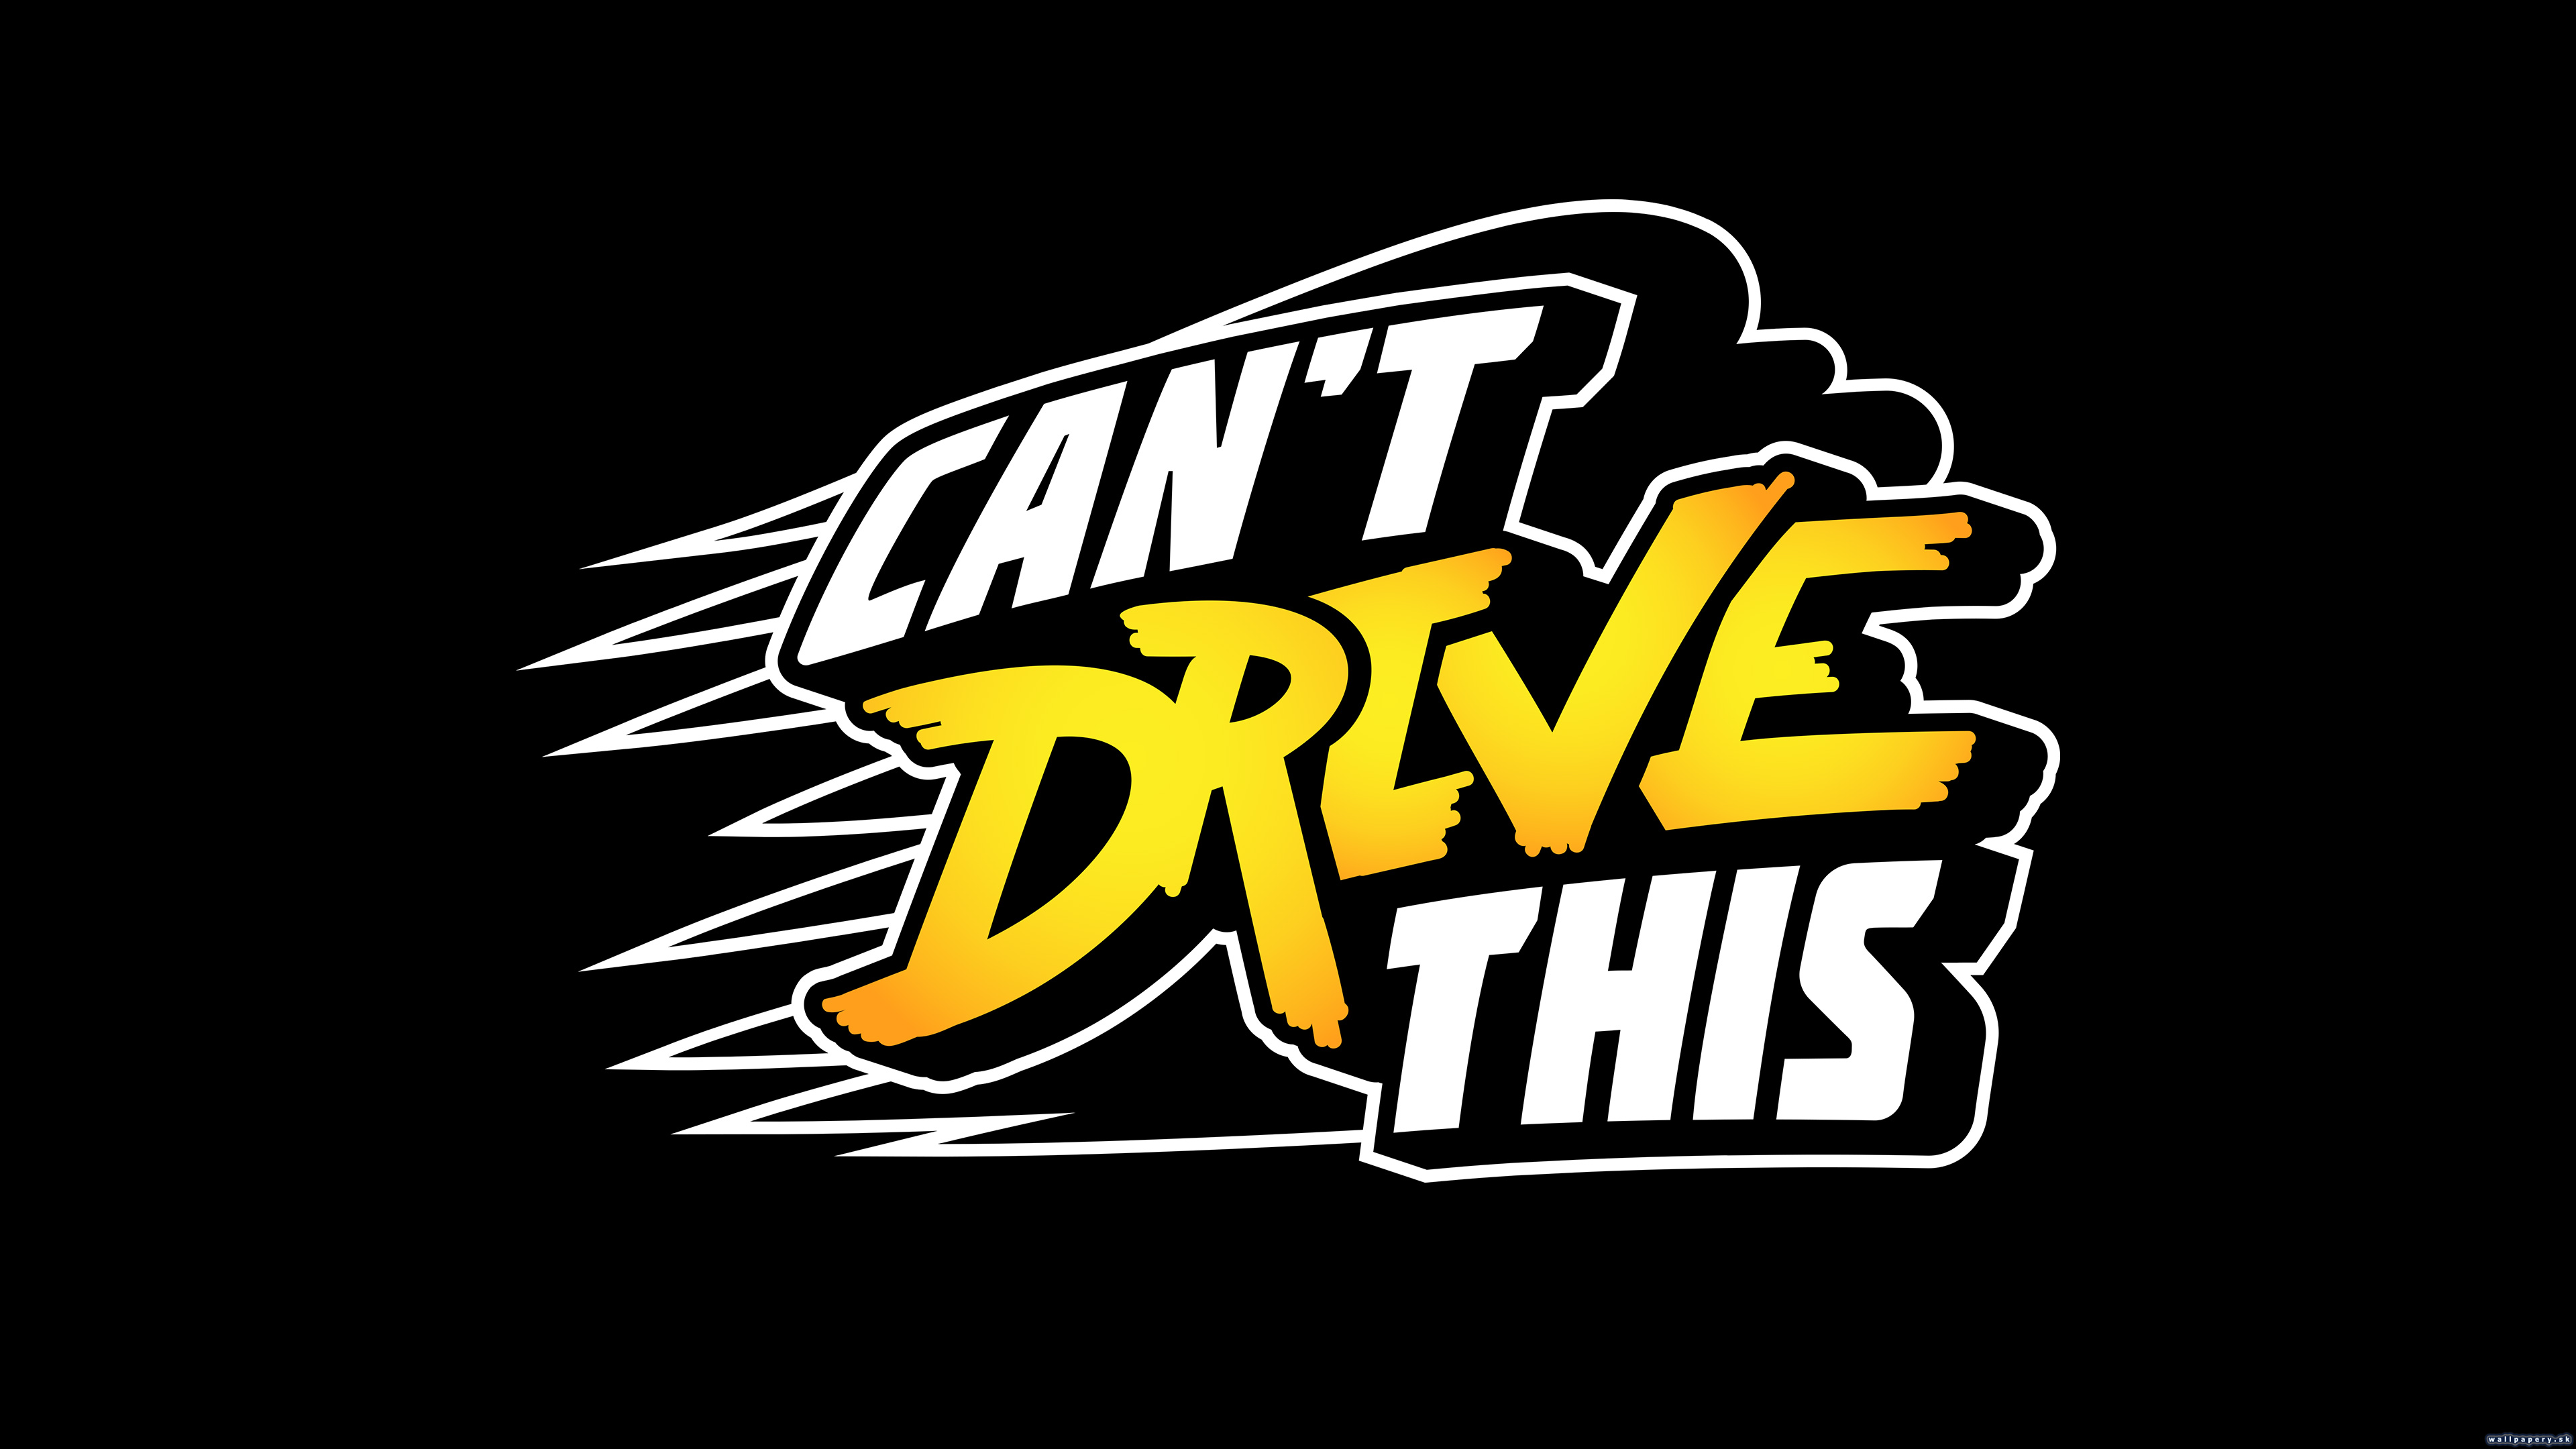 Can't Drive This - wallpaper 2